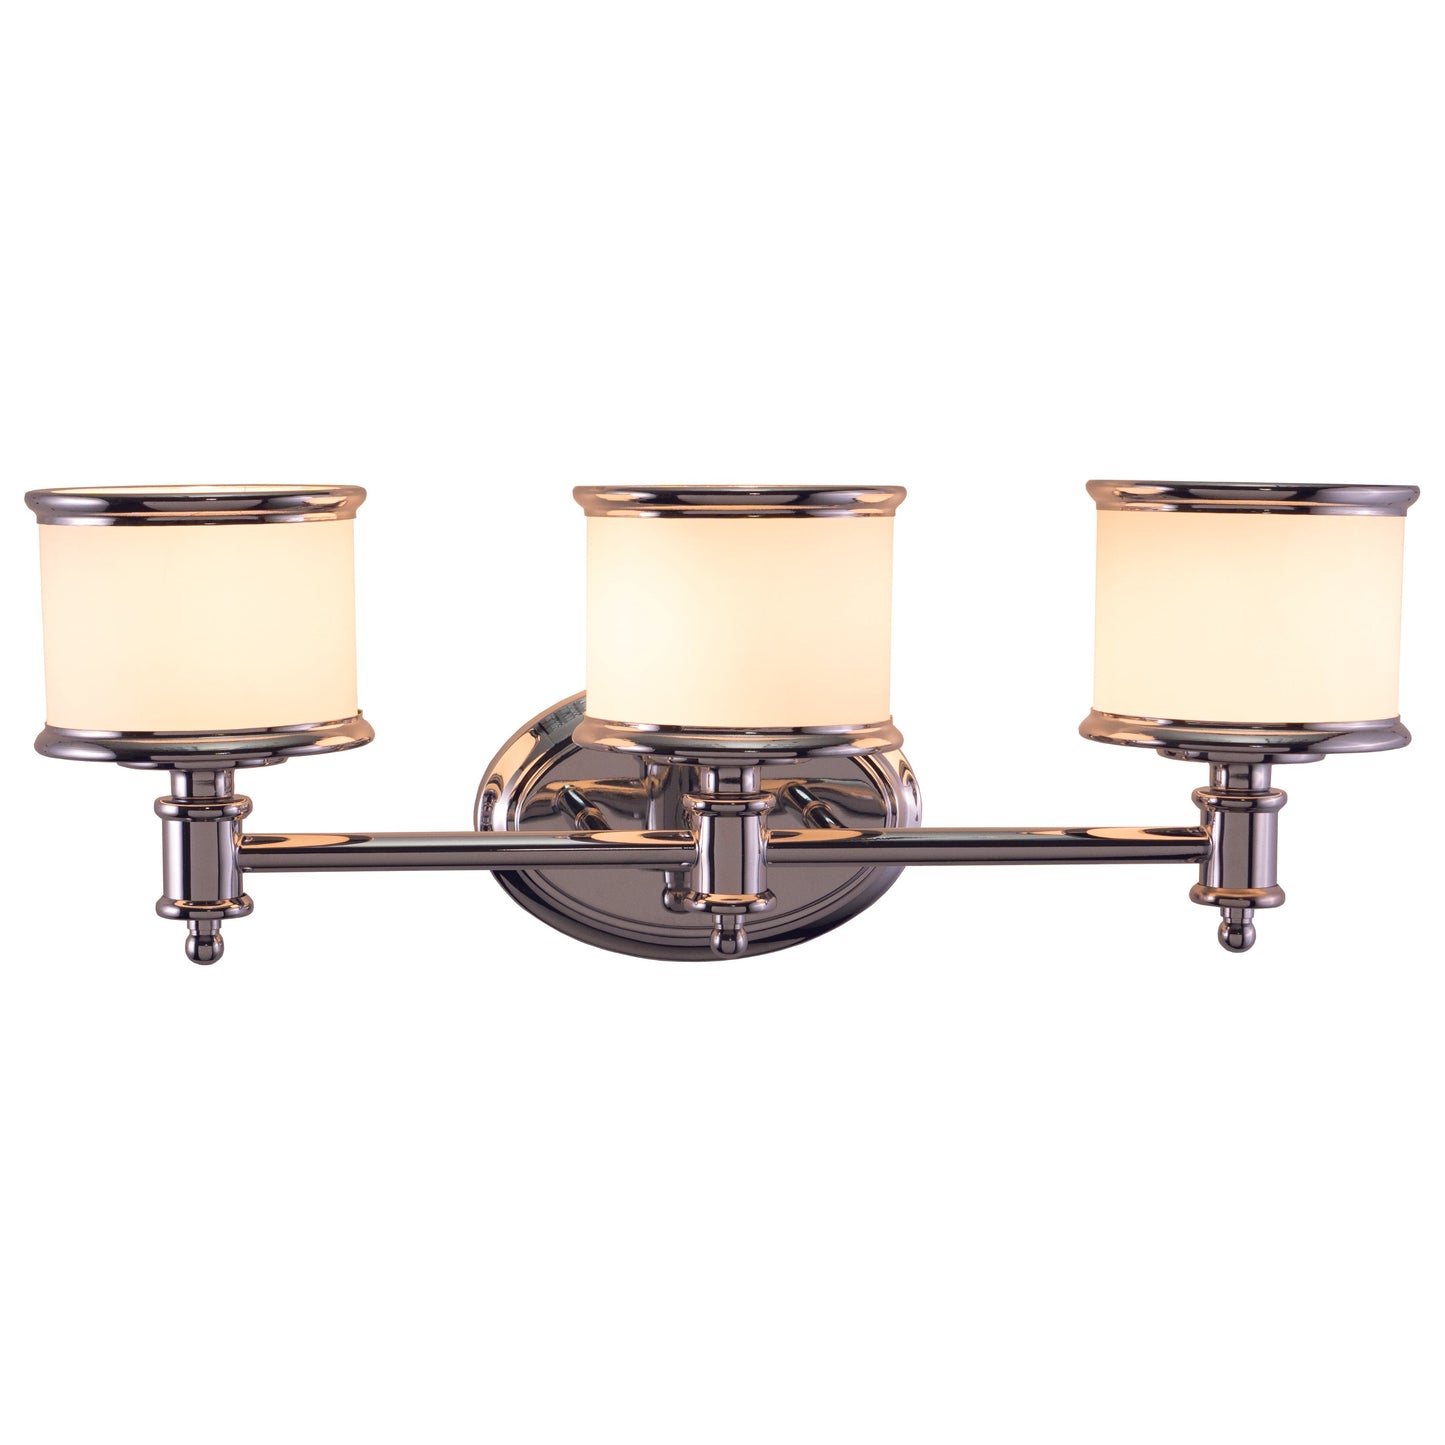 Vaxcel Carlisle 23" 3-Light Chrome Steel Bathroom Vanity Fixture With White Frosted Opal Glass Shades